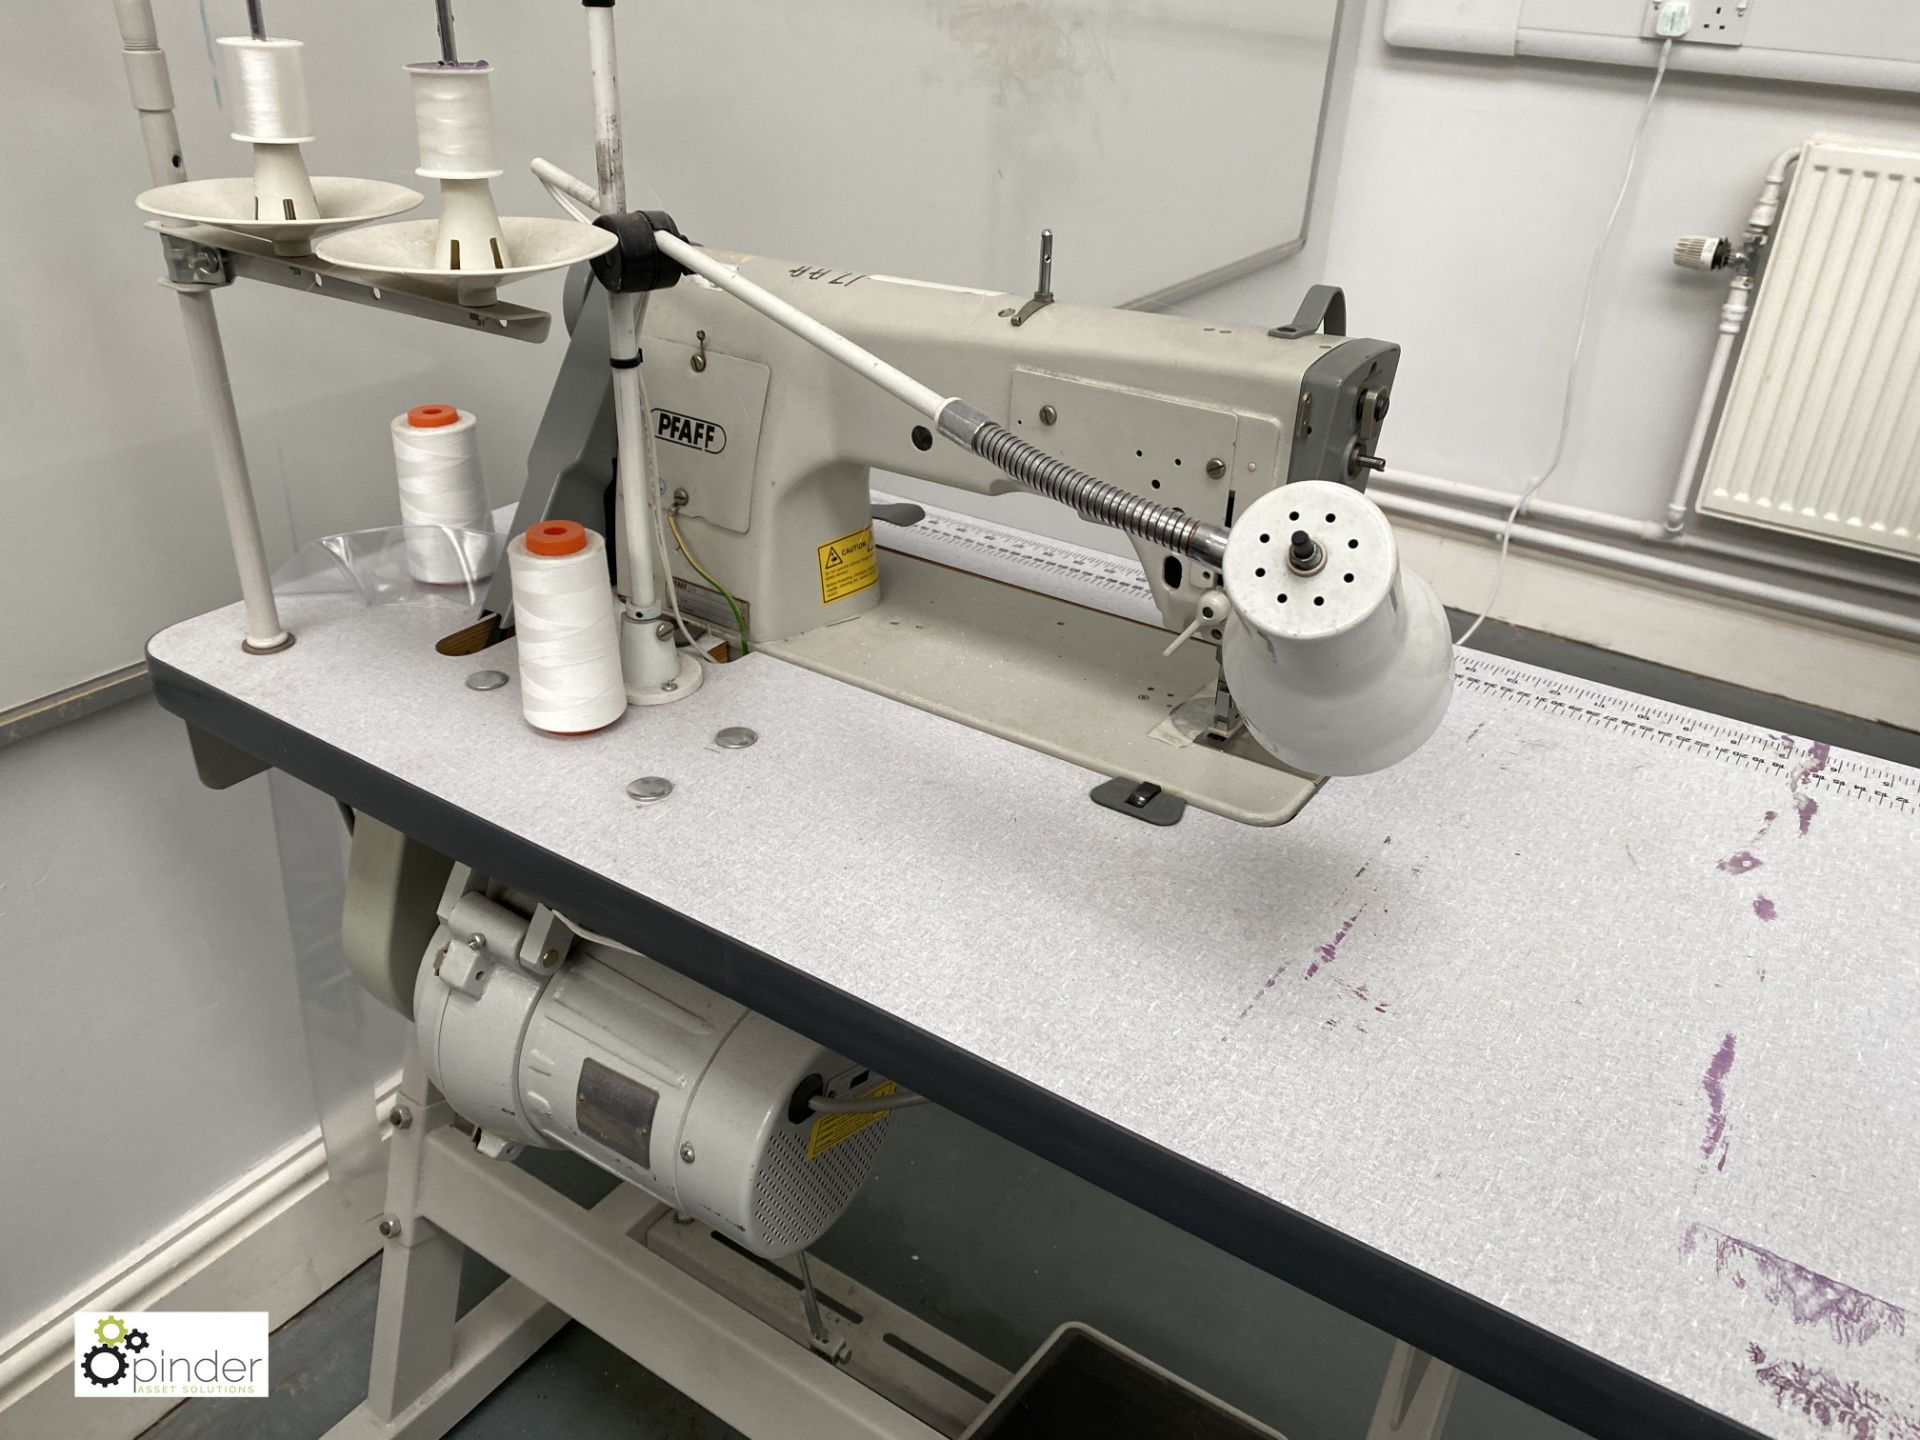 Pfaff 561 Lockstitch Sewing Machine, 240volts (location: Level 1, Joinery Workrooms) - Image 3 of 4